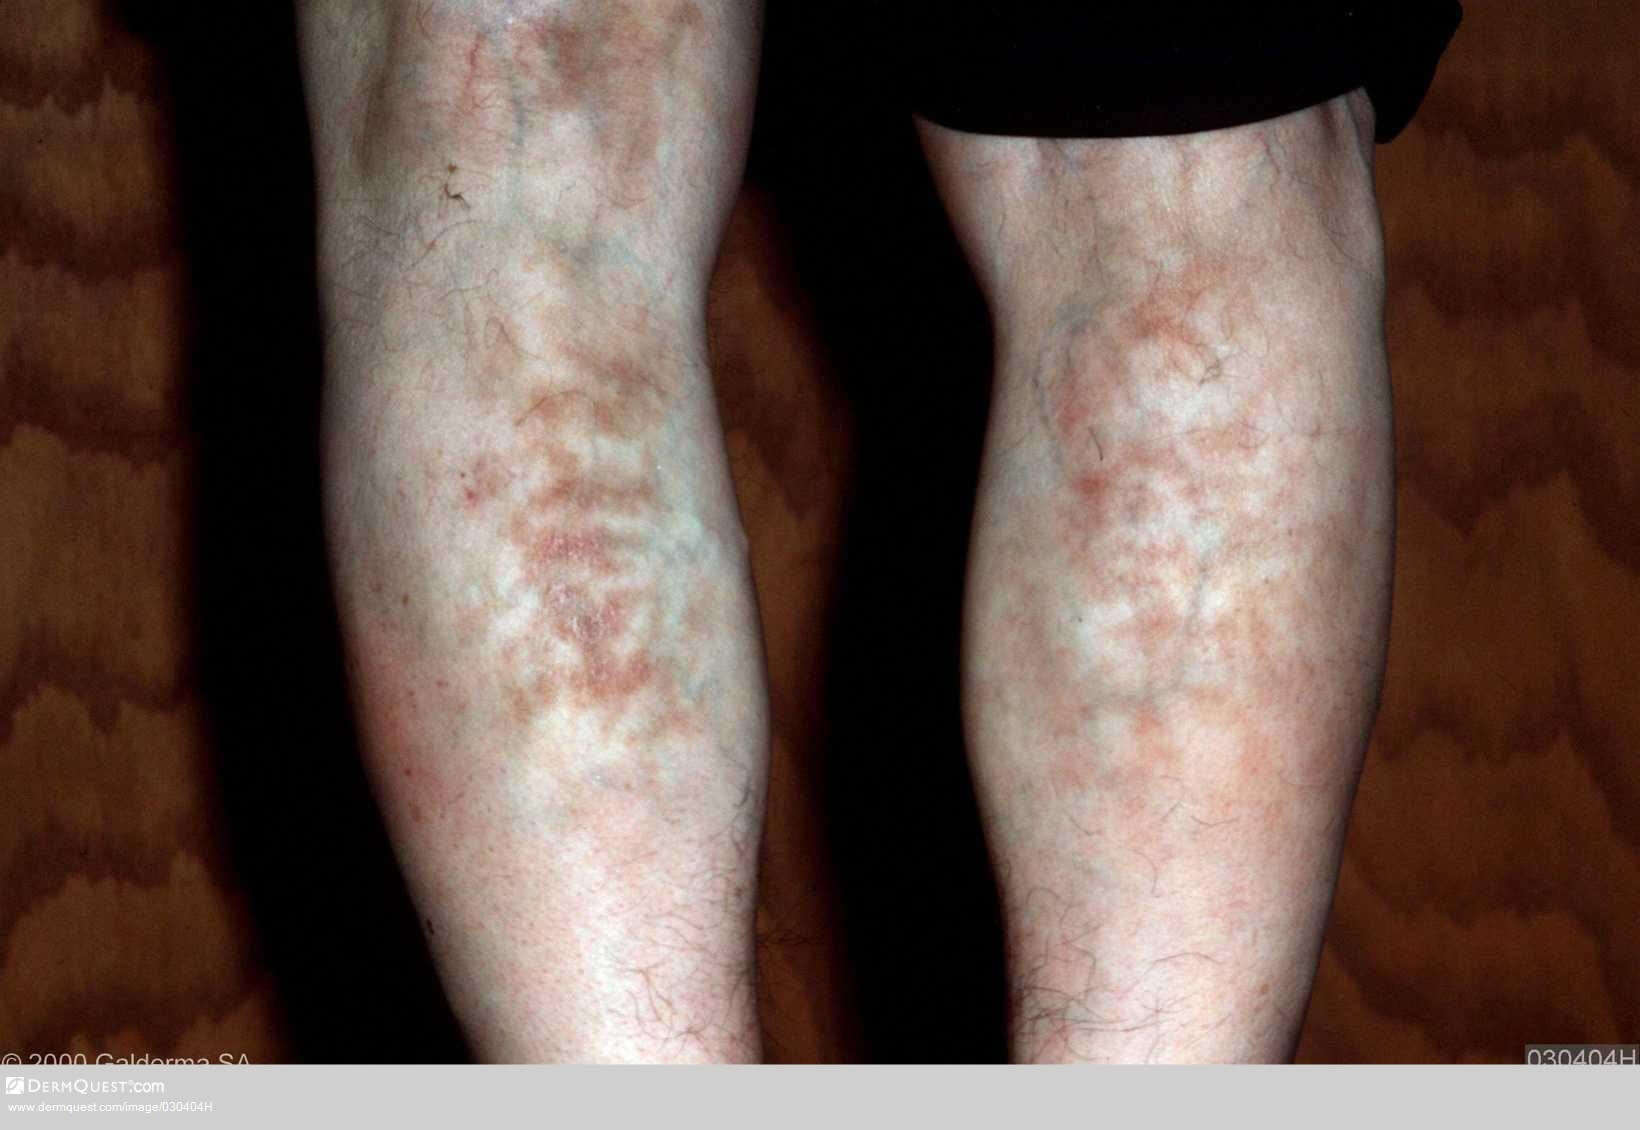 Erythema Ab Igne - Diseases & Conditions - Medscape Reference